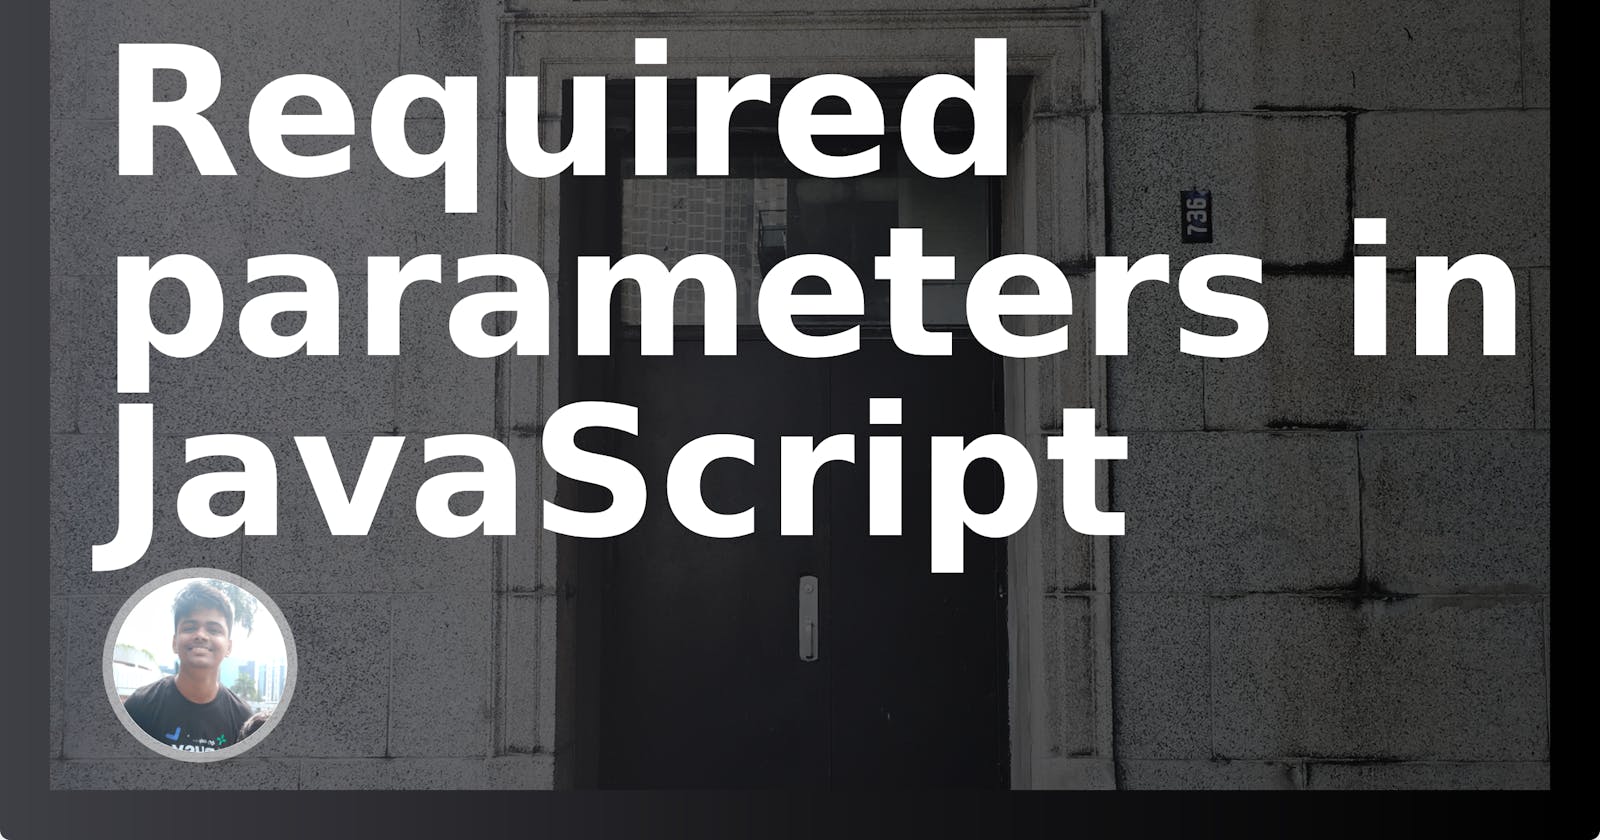 A short post on Required parameters in JavaScript